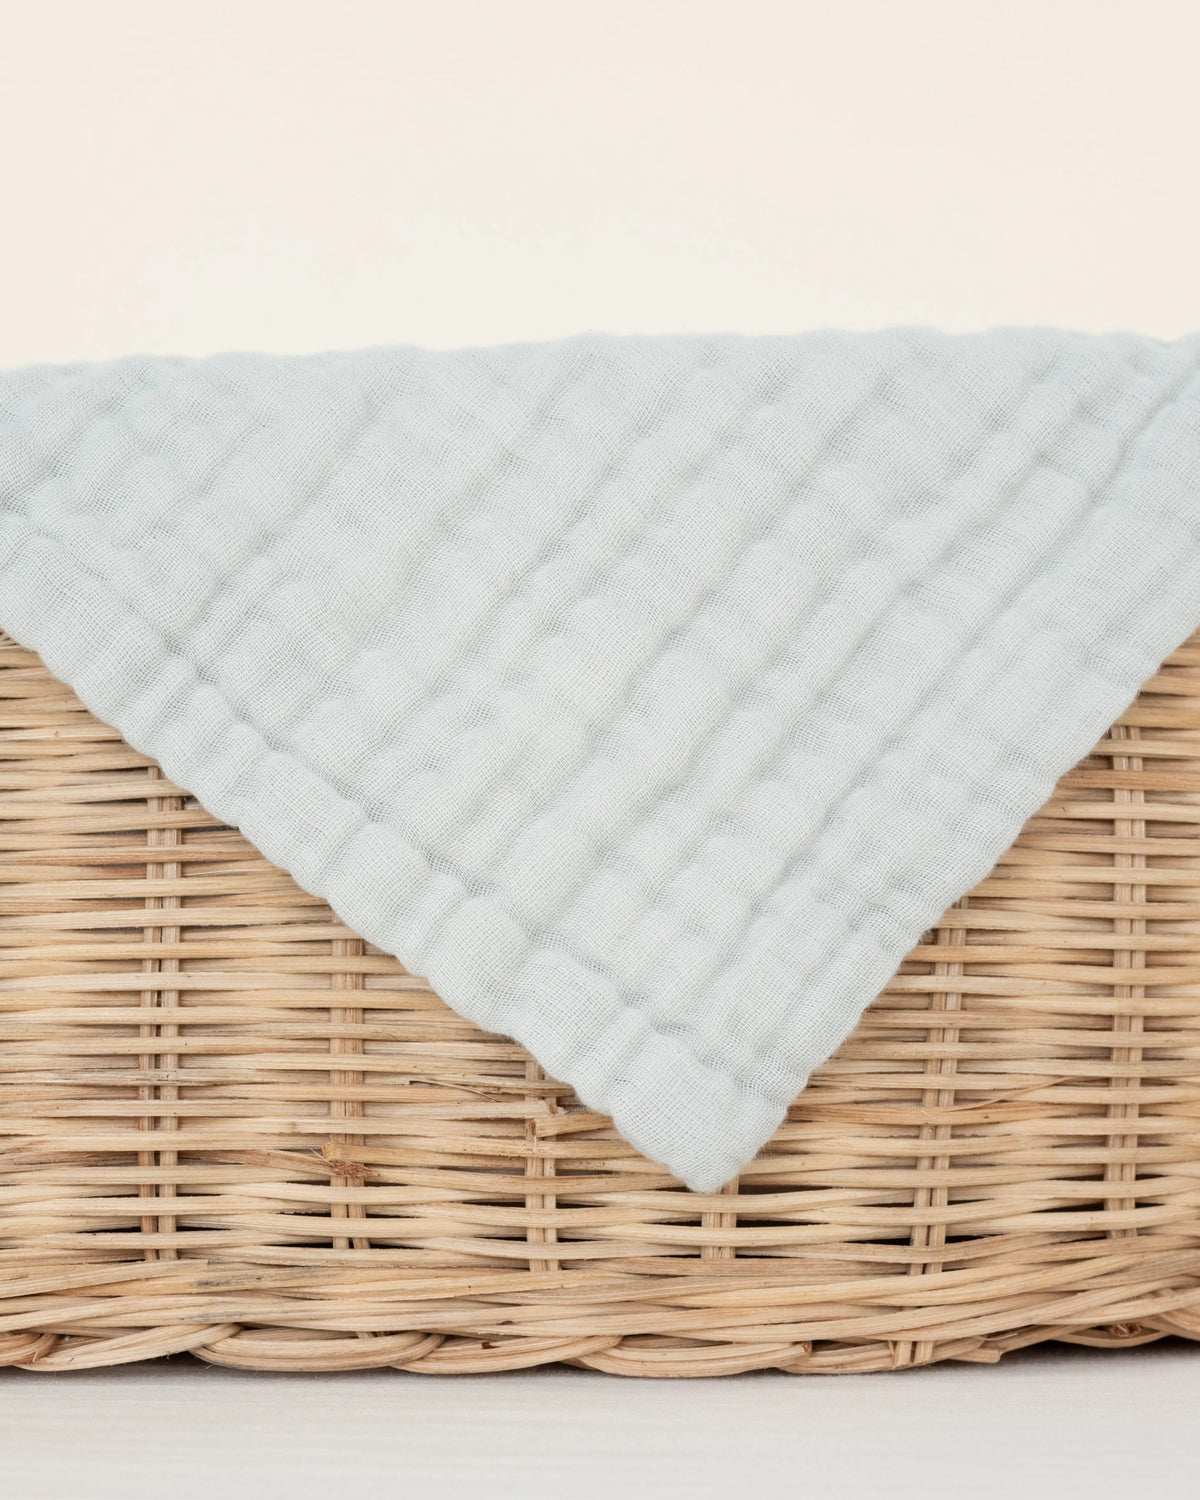 Basic Baby Blanket | Full Size by Willaby